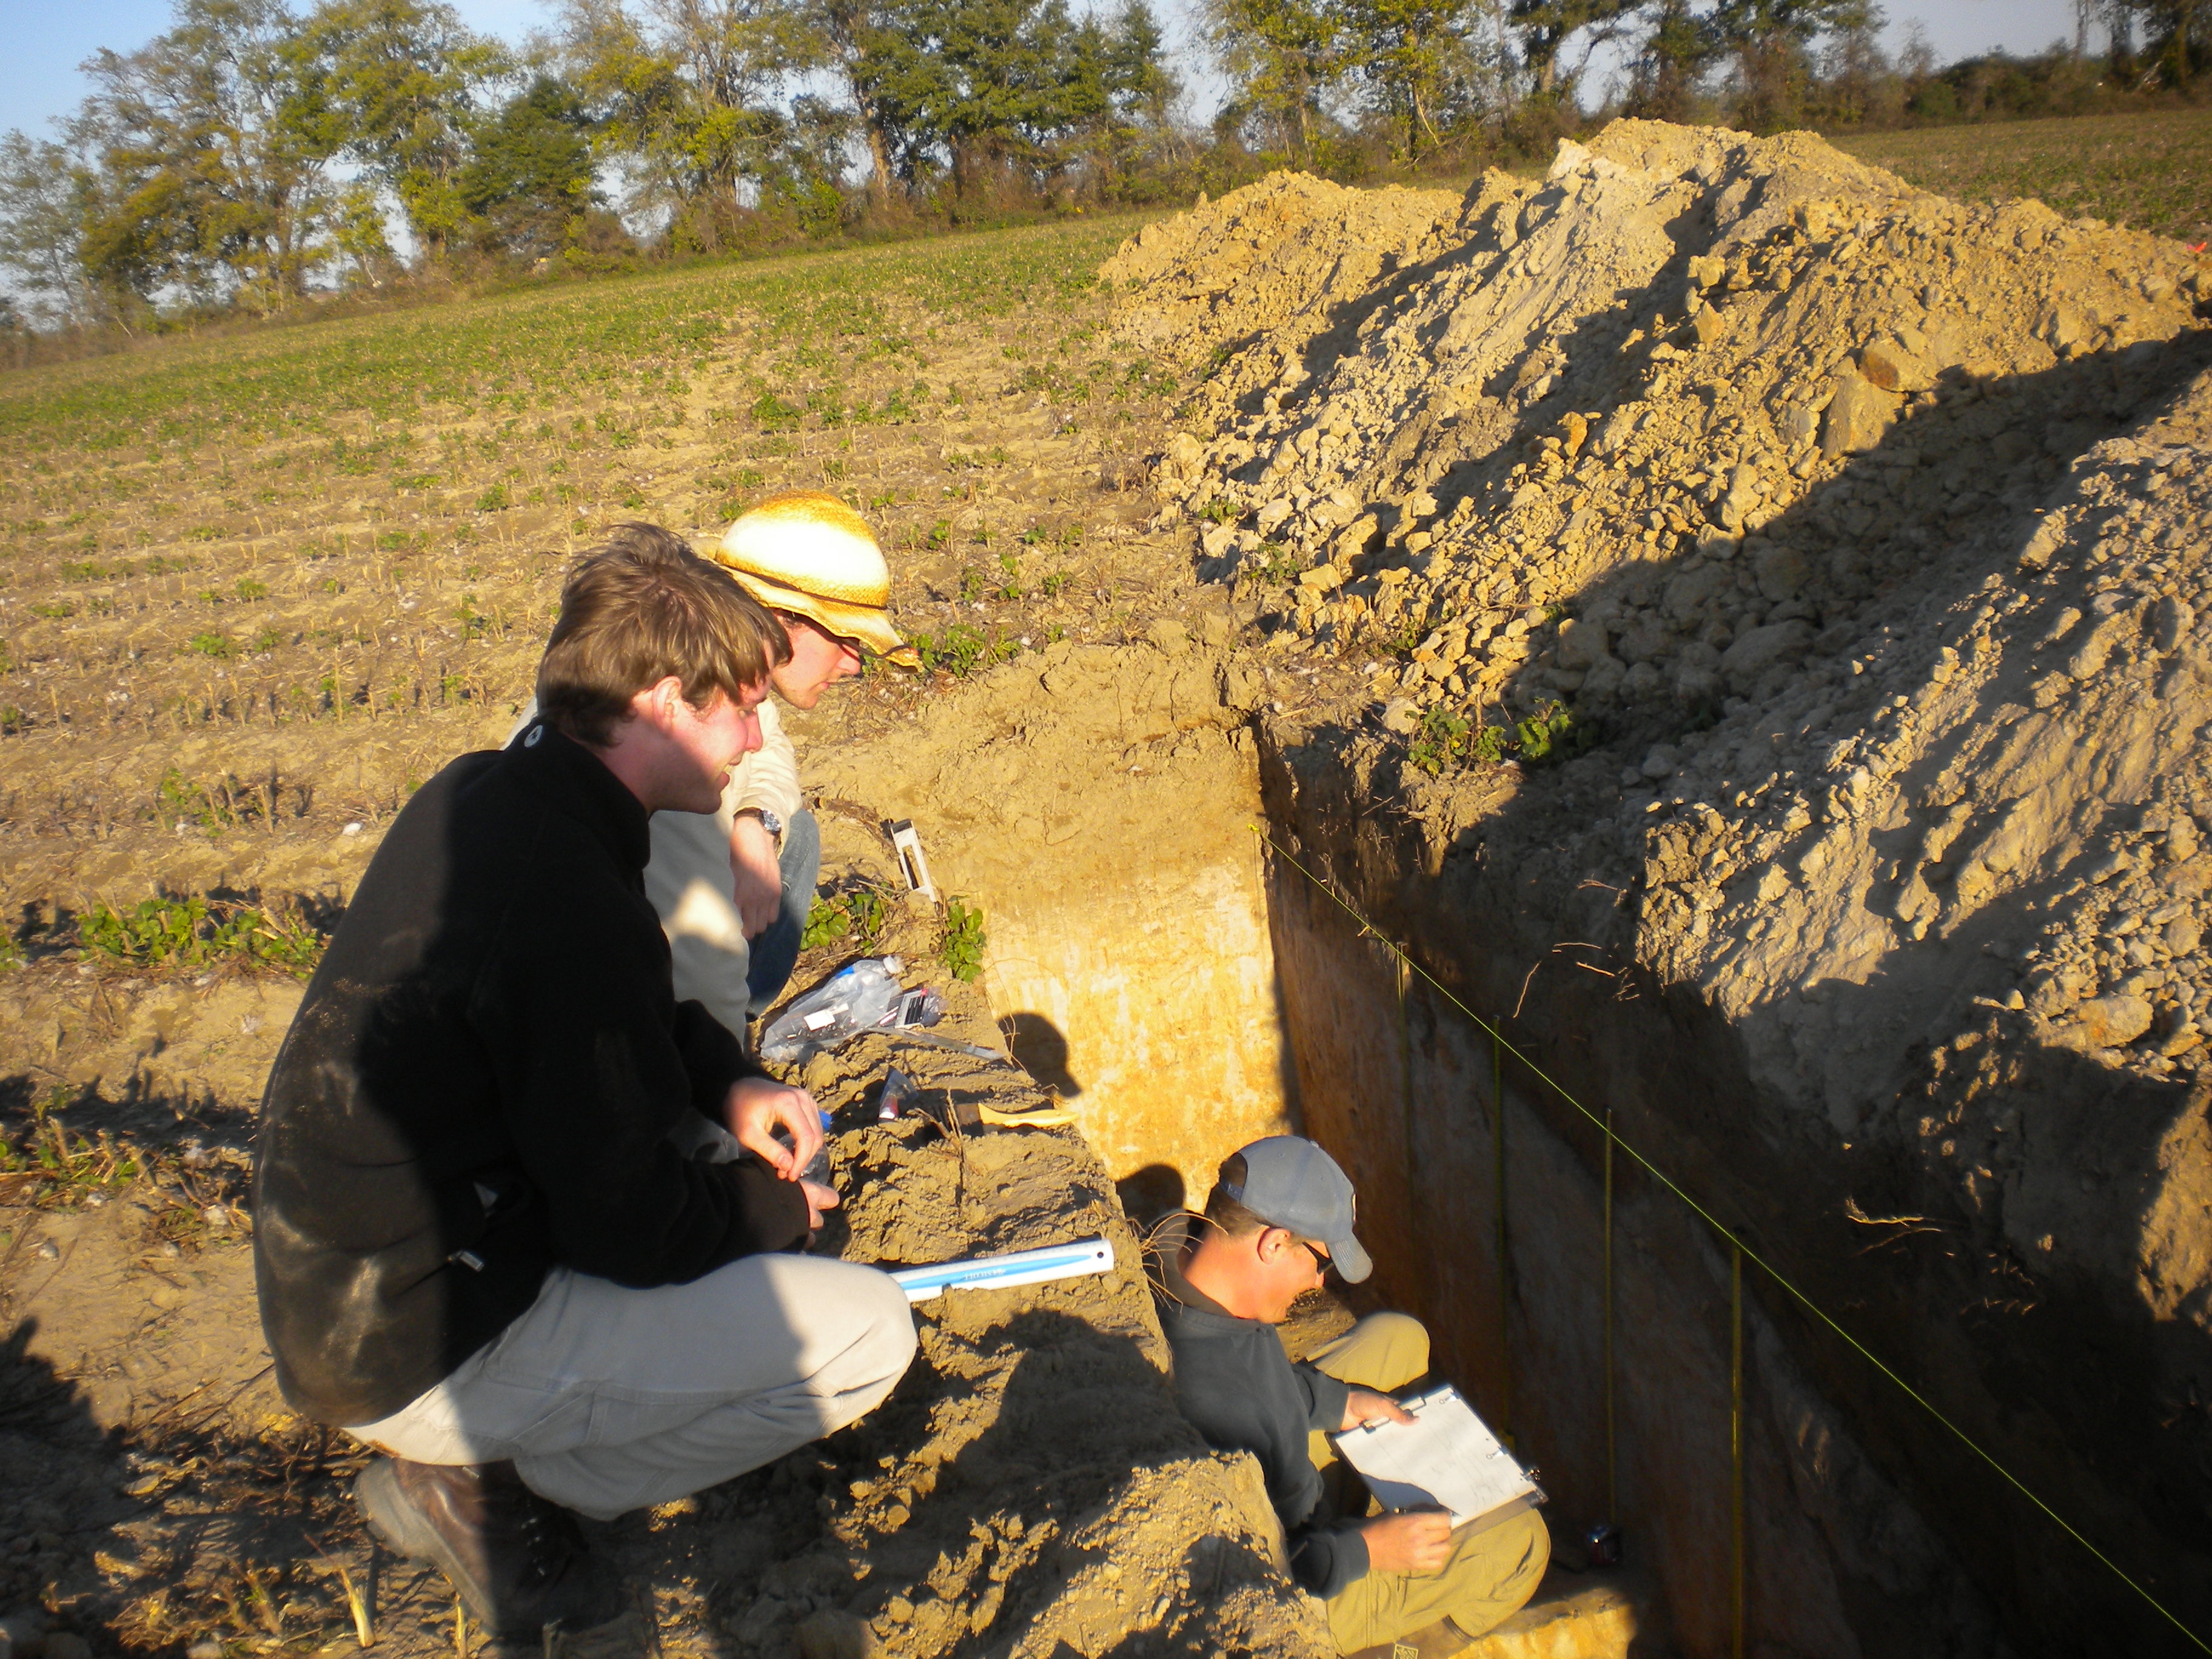 This is a trench dug into a liquefaction sand blow found in the New Madrid Seismic Zone in the central U.S. One student is an undergrad (has the farmer’s hat) and two are graduate students.